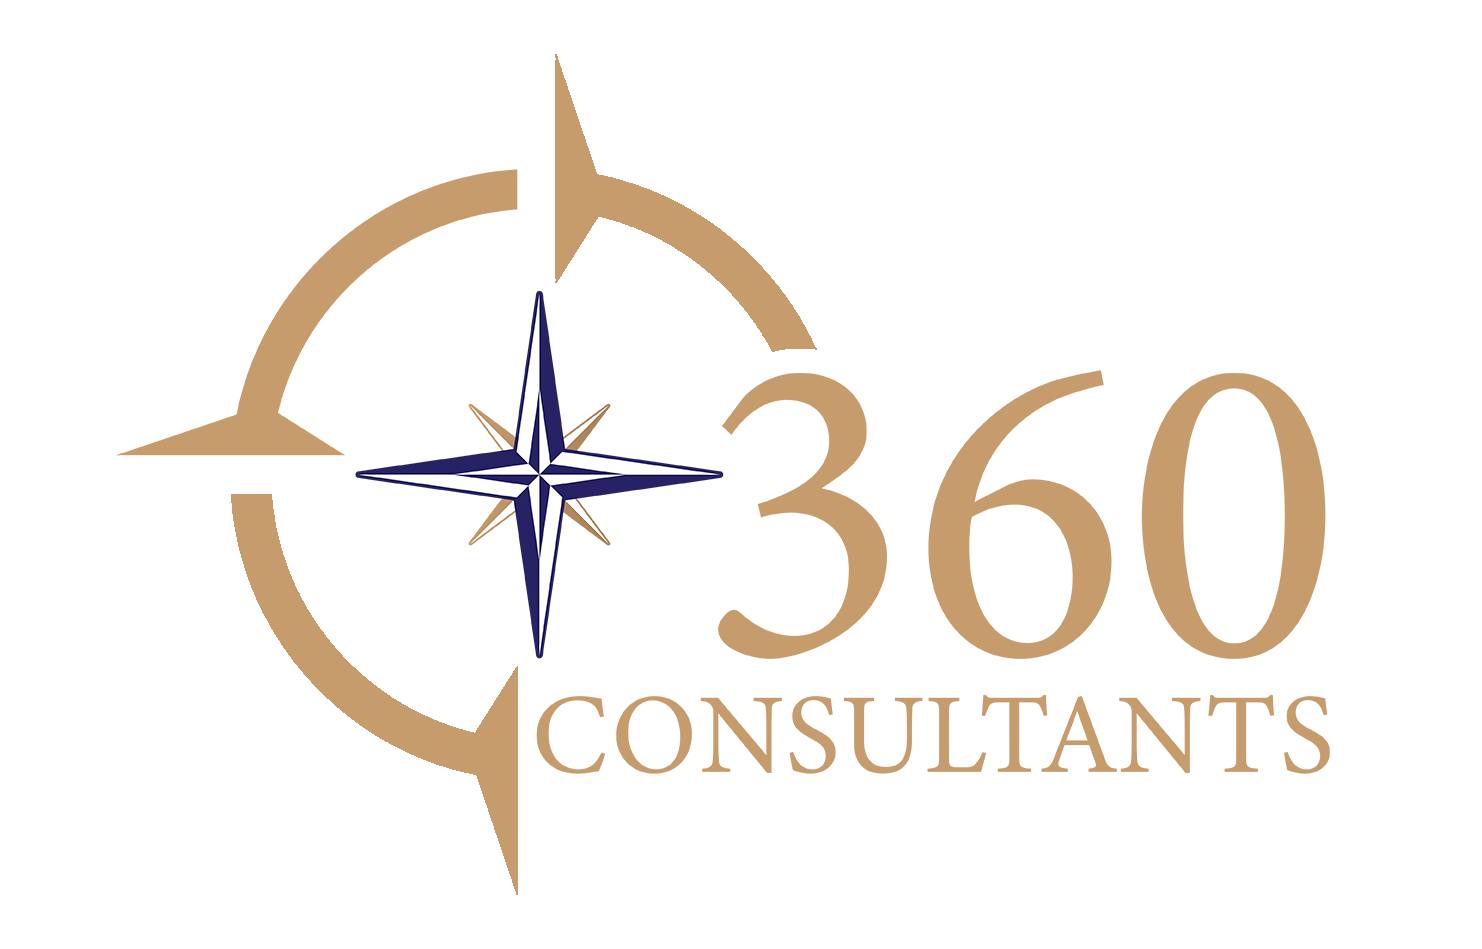 360 consultants small gold